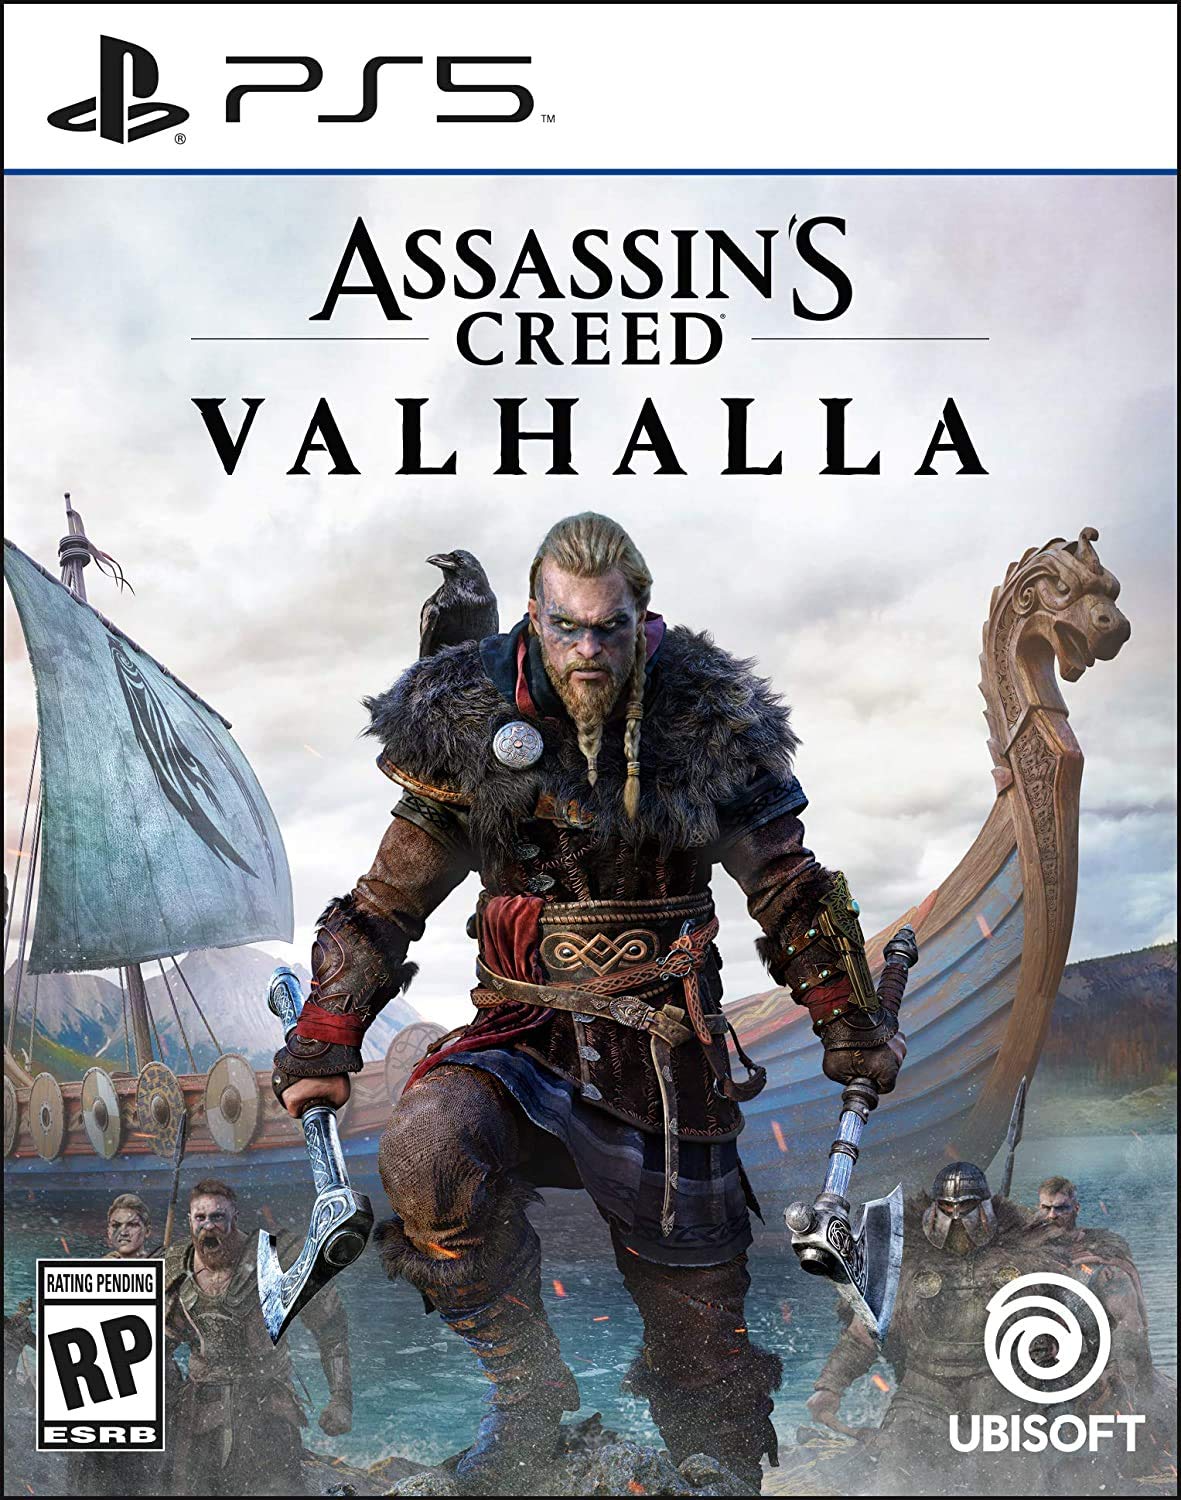 PS5|PS4 Assassin's Creed Valhalla Standard Amazon - $34.99